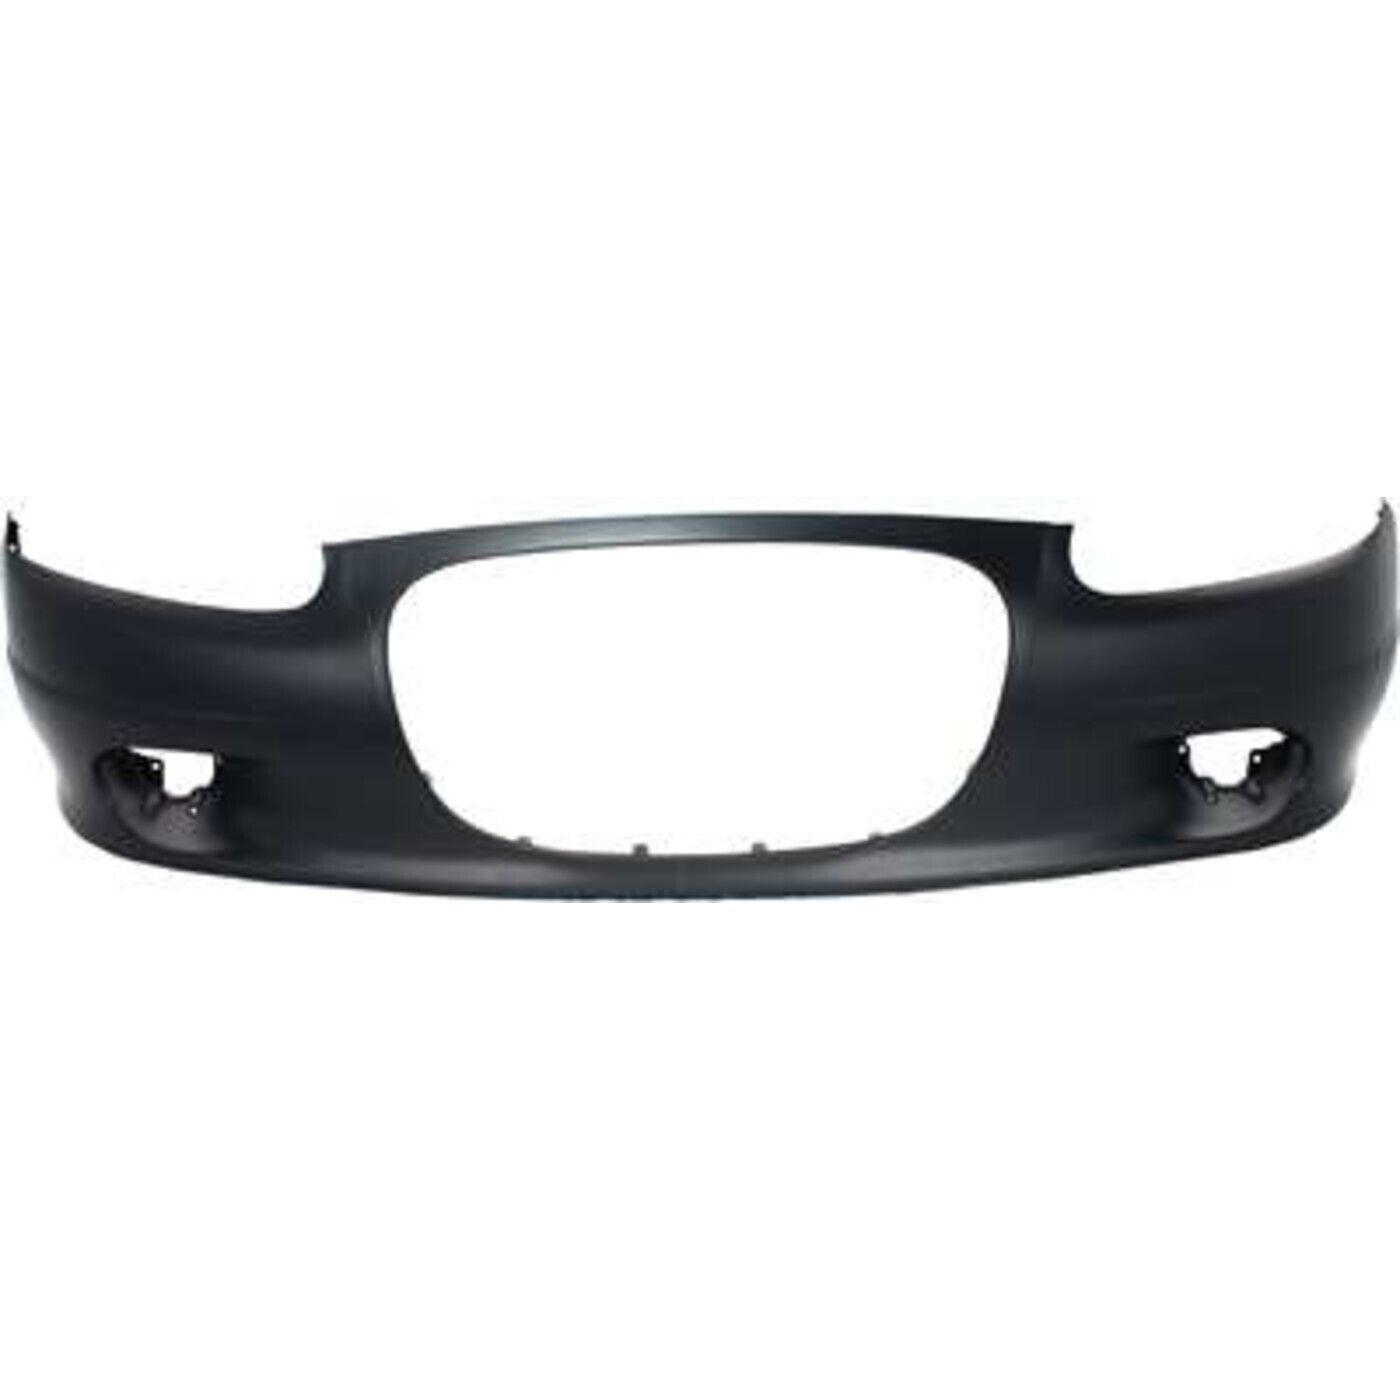 Bumper Cover For 2002-2004 Chrysler Concorde Front Plastic With Fog Light Holes